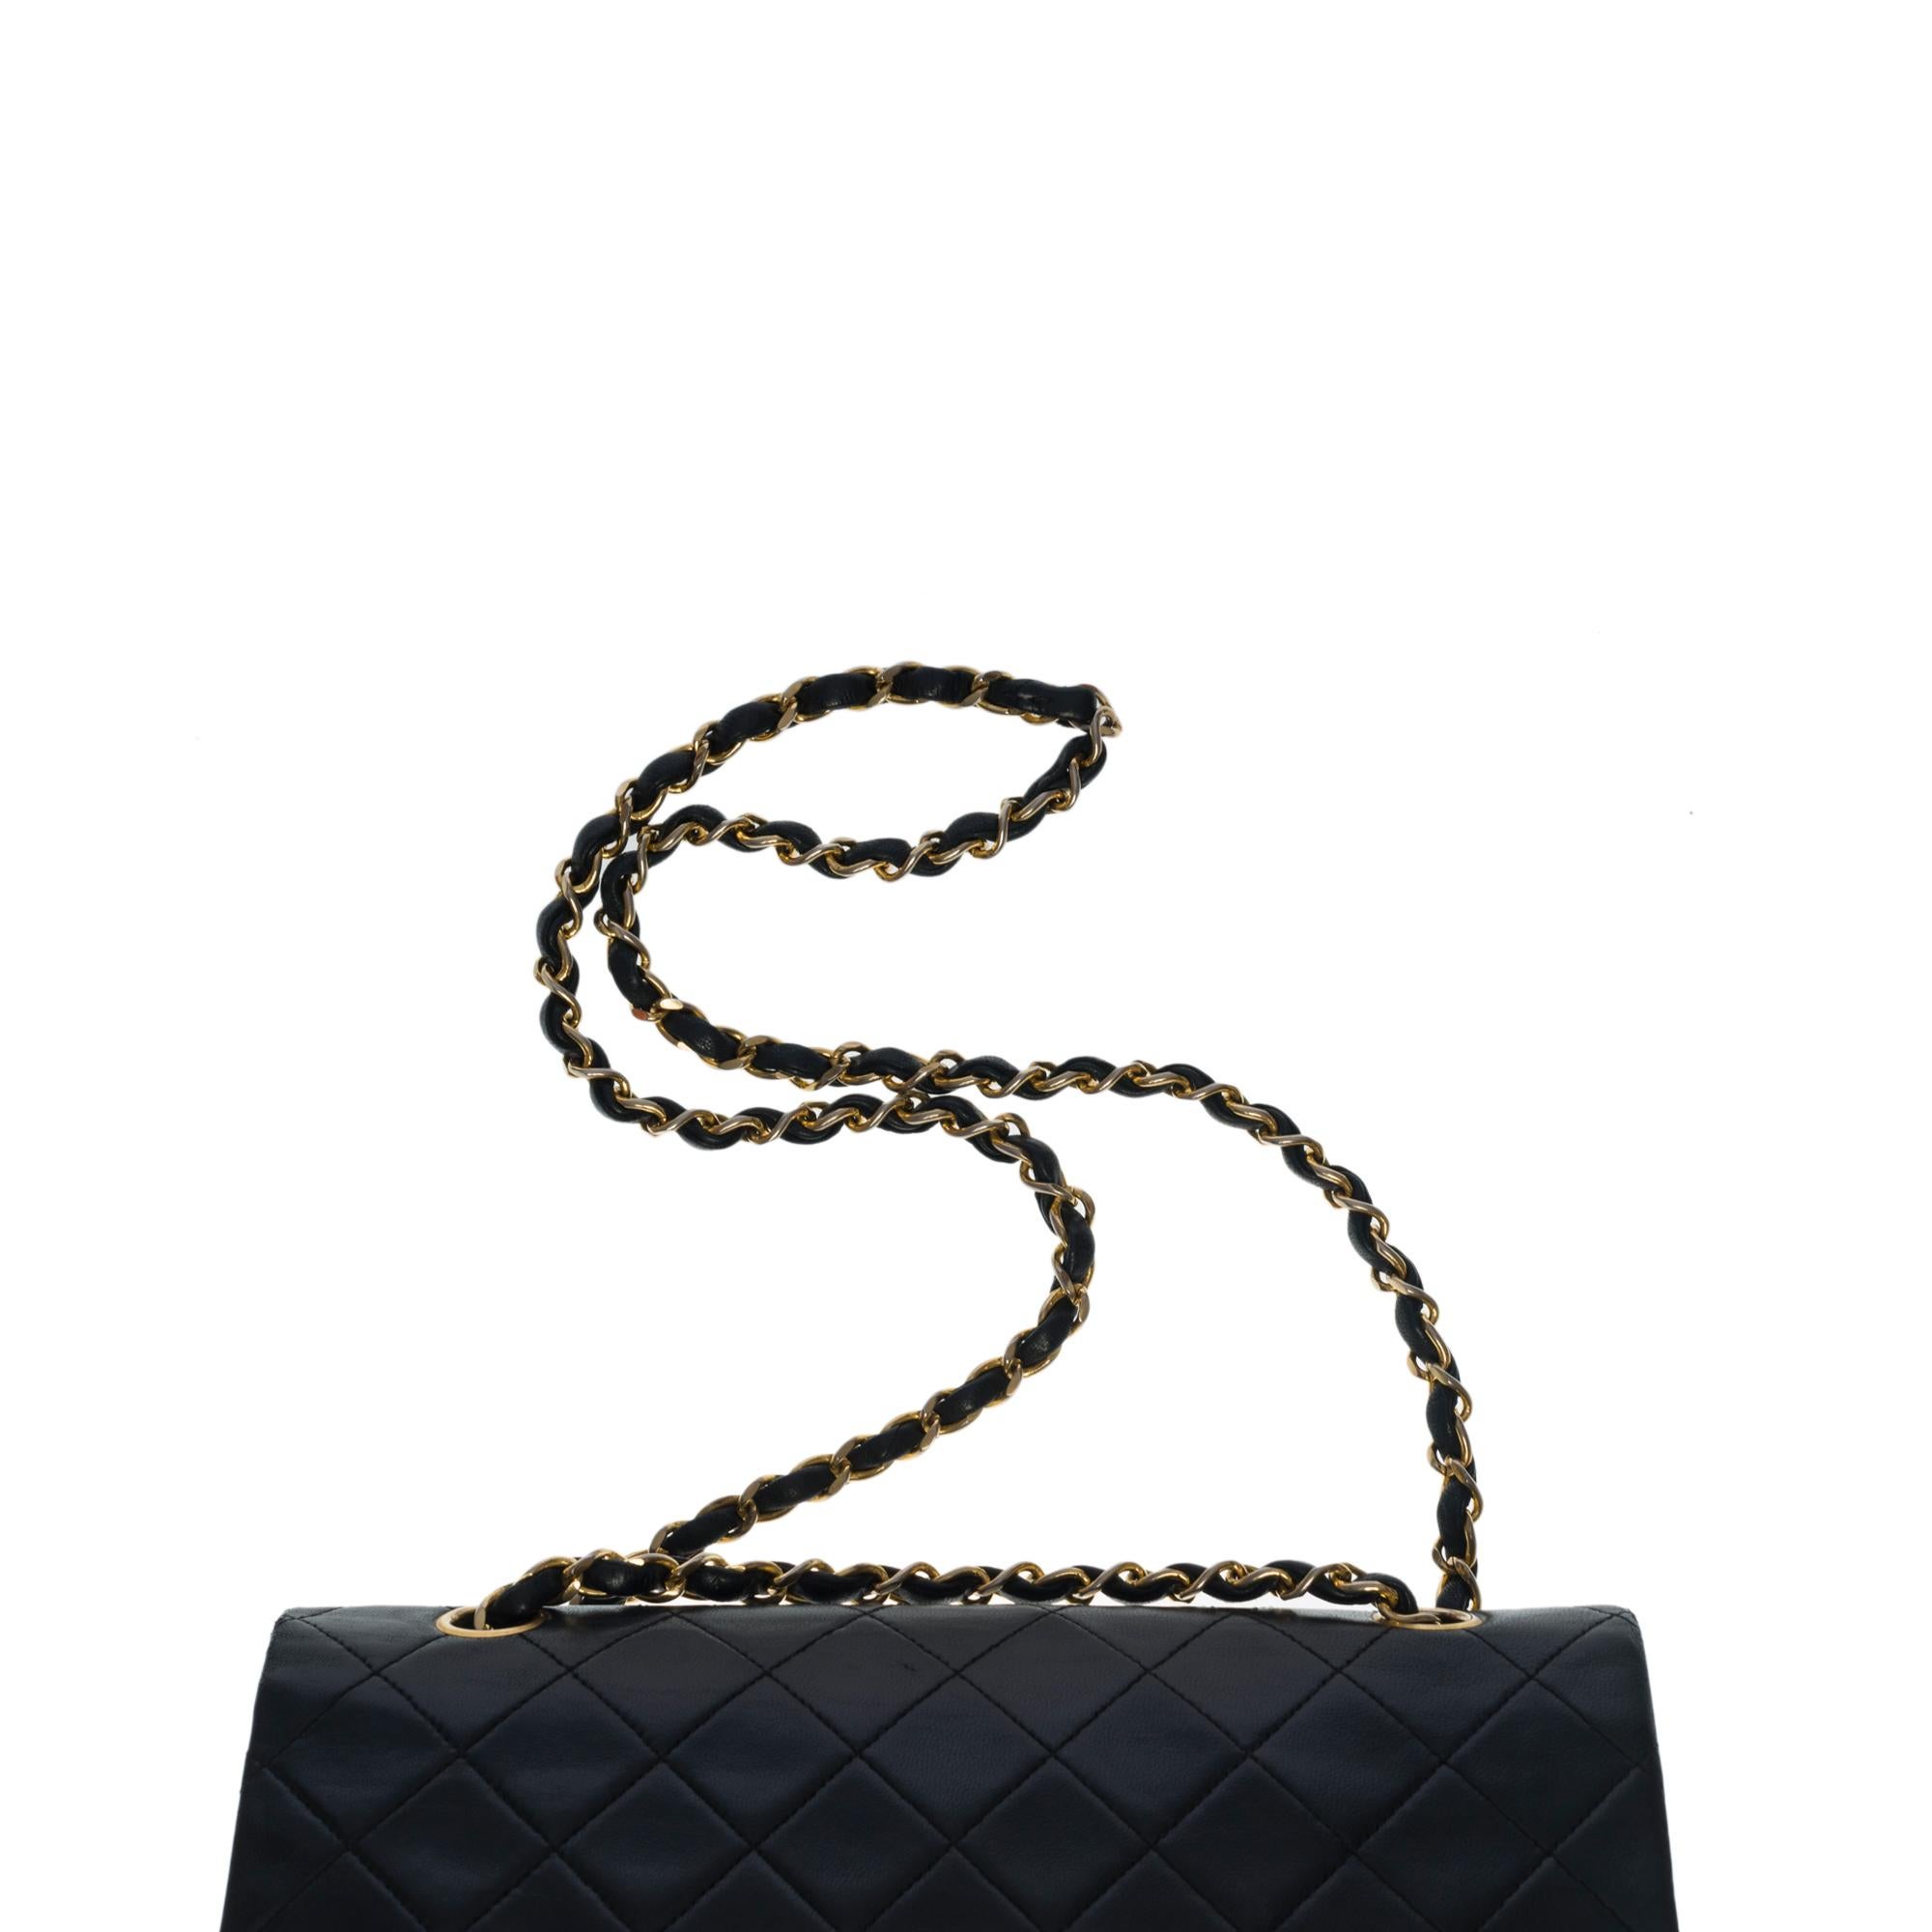 Chanel Timeless Medium double flap shoulder bag in black quilted lambskin, GHW 2